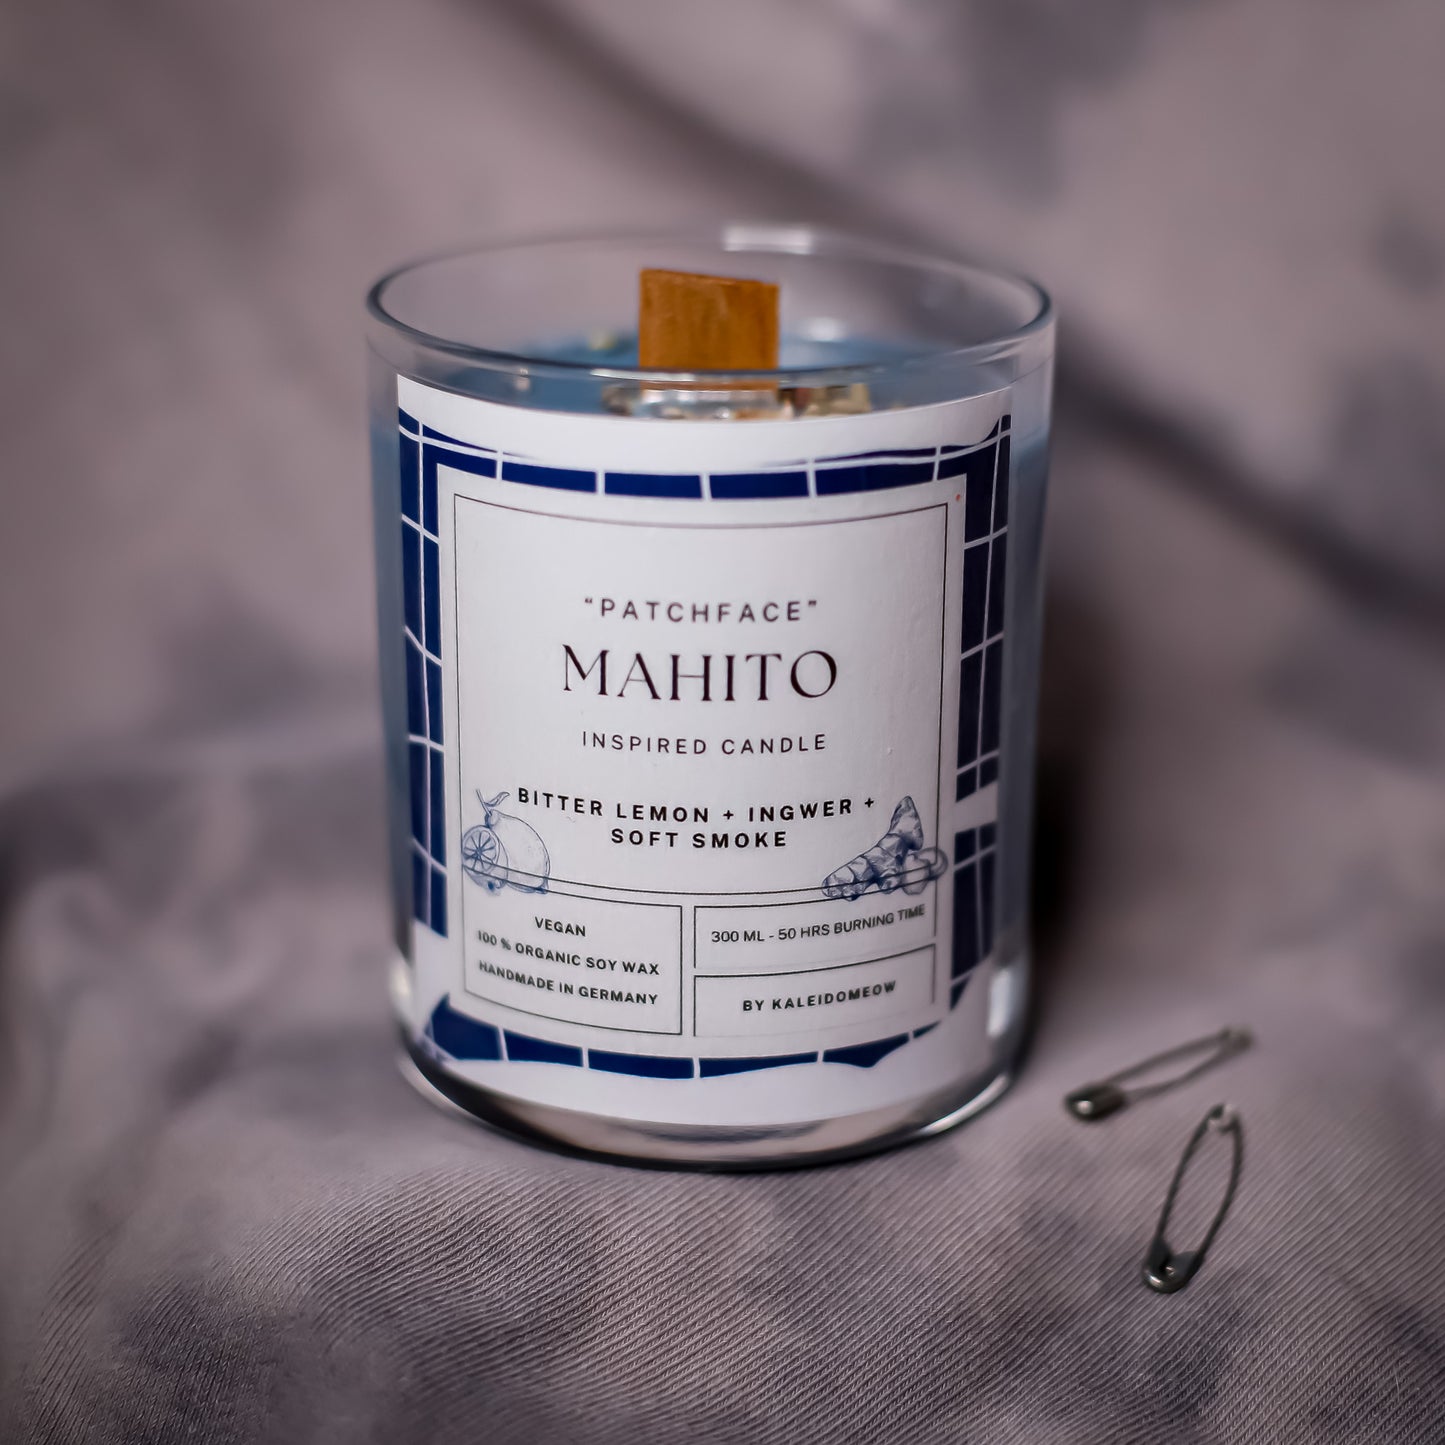 MAHITO inspired candle - 'Patchface' Jujutsu kaisen inspired soy Candle 300 ML